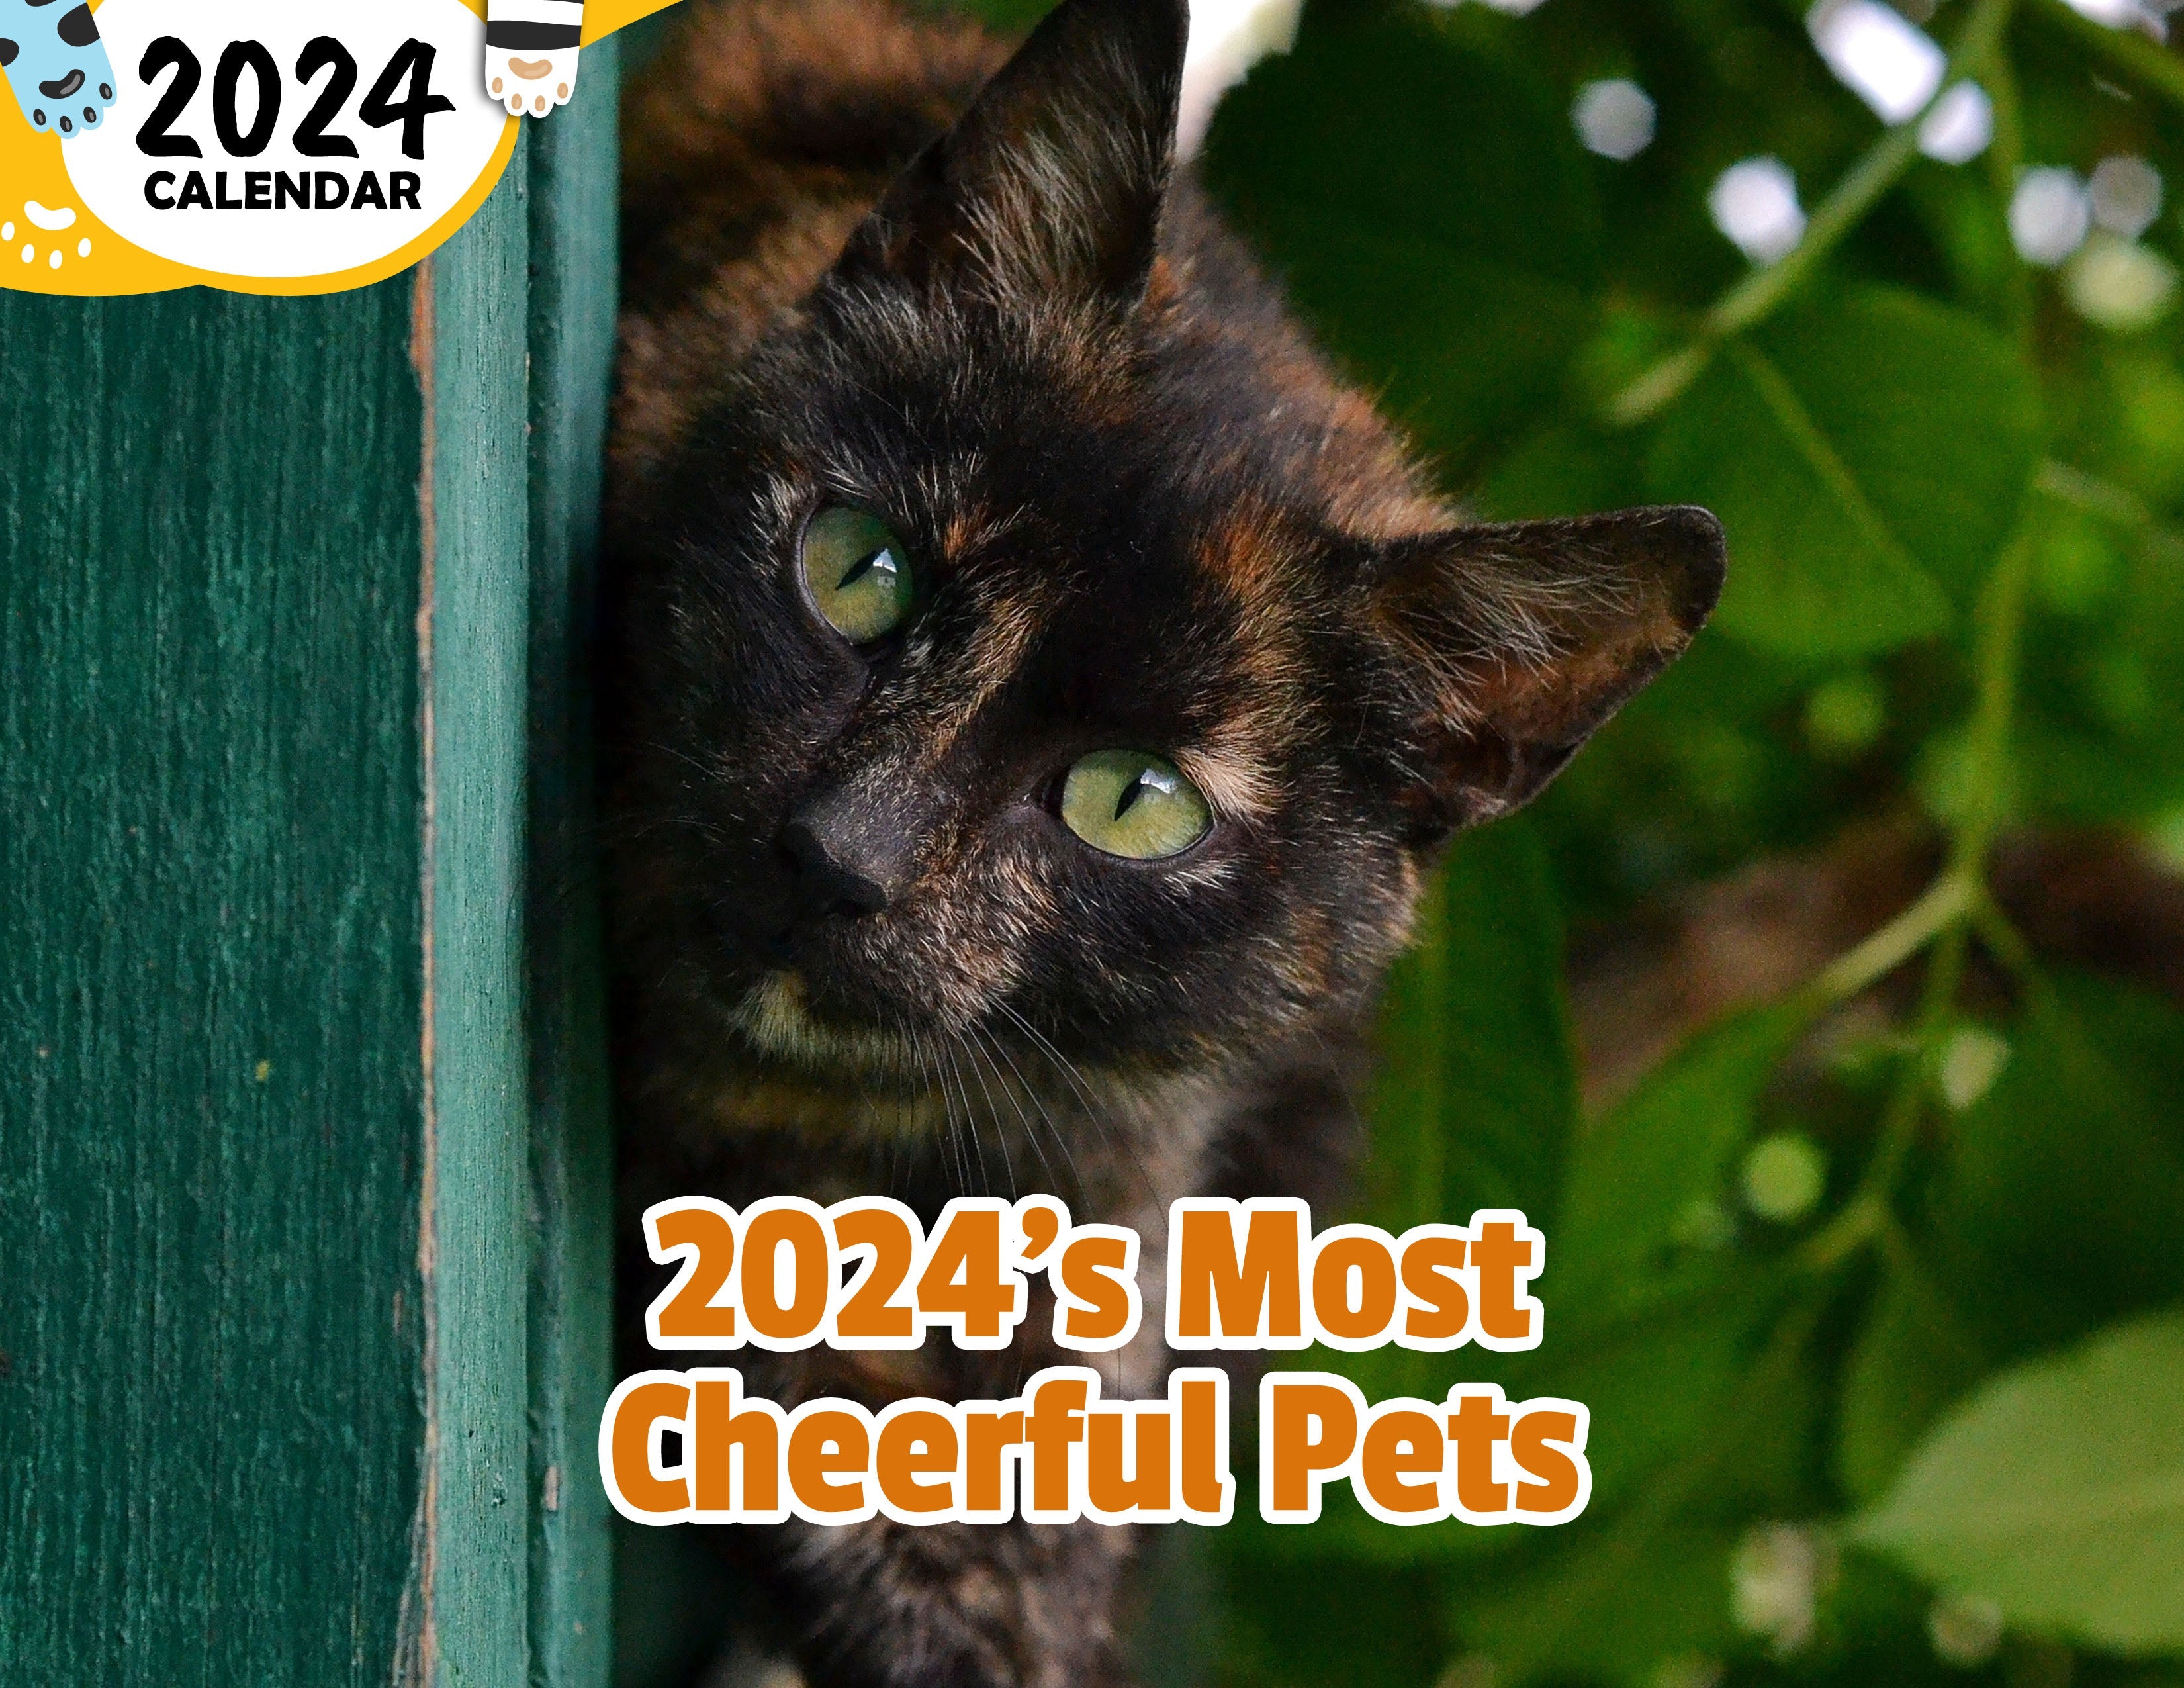 2024-s-most-cheerful-pets-2024-wall-calendar-published-praise-my-pet